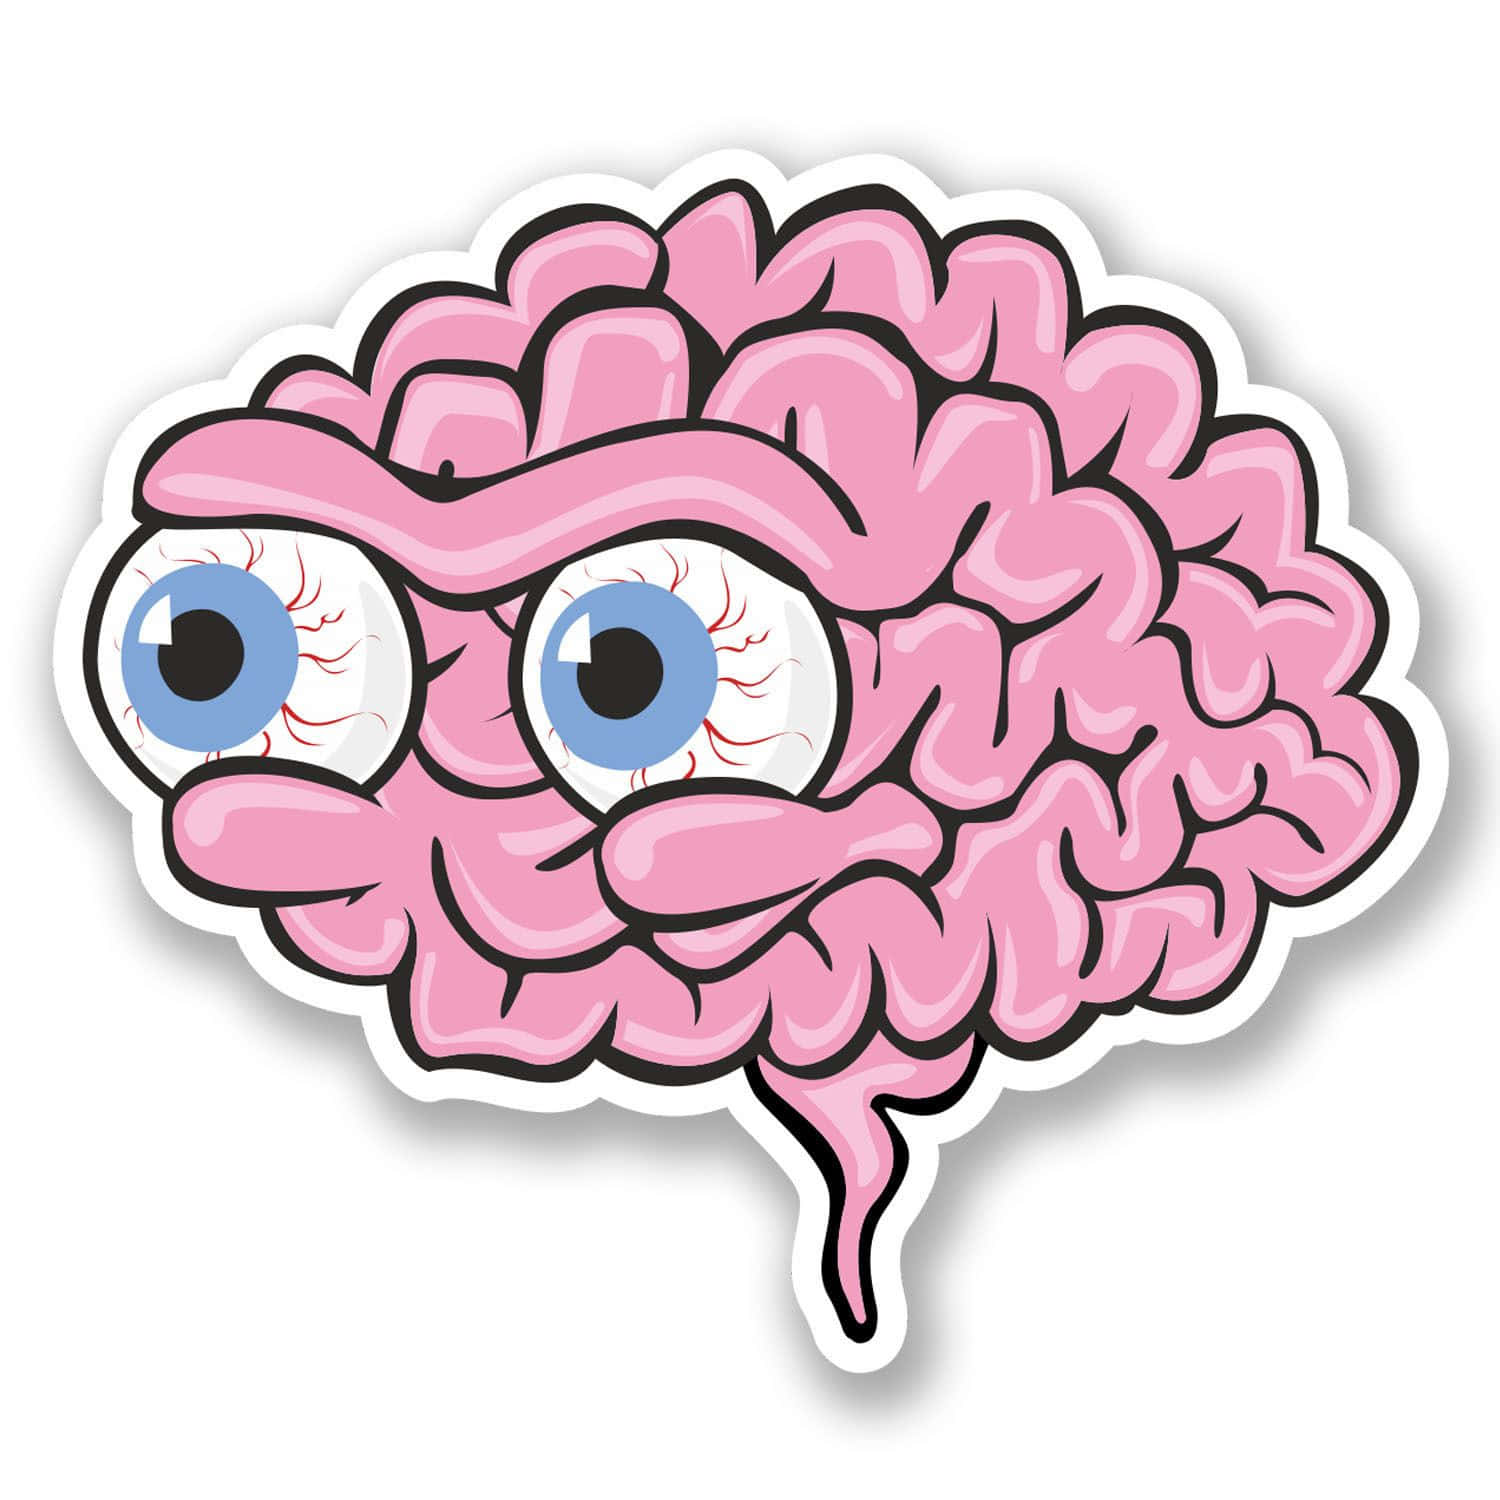 A Pink Brain Sticker With Eyes And A Mouth